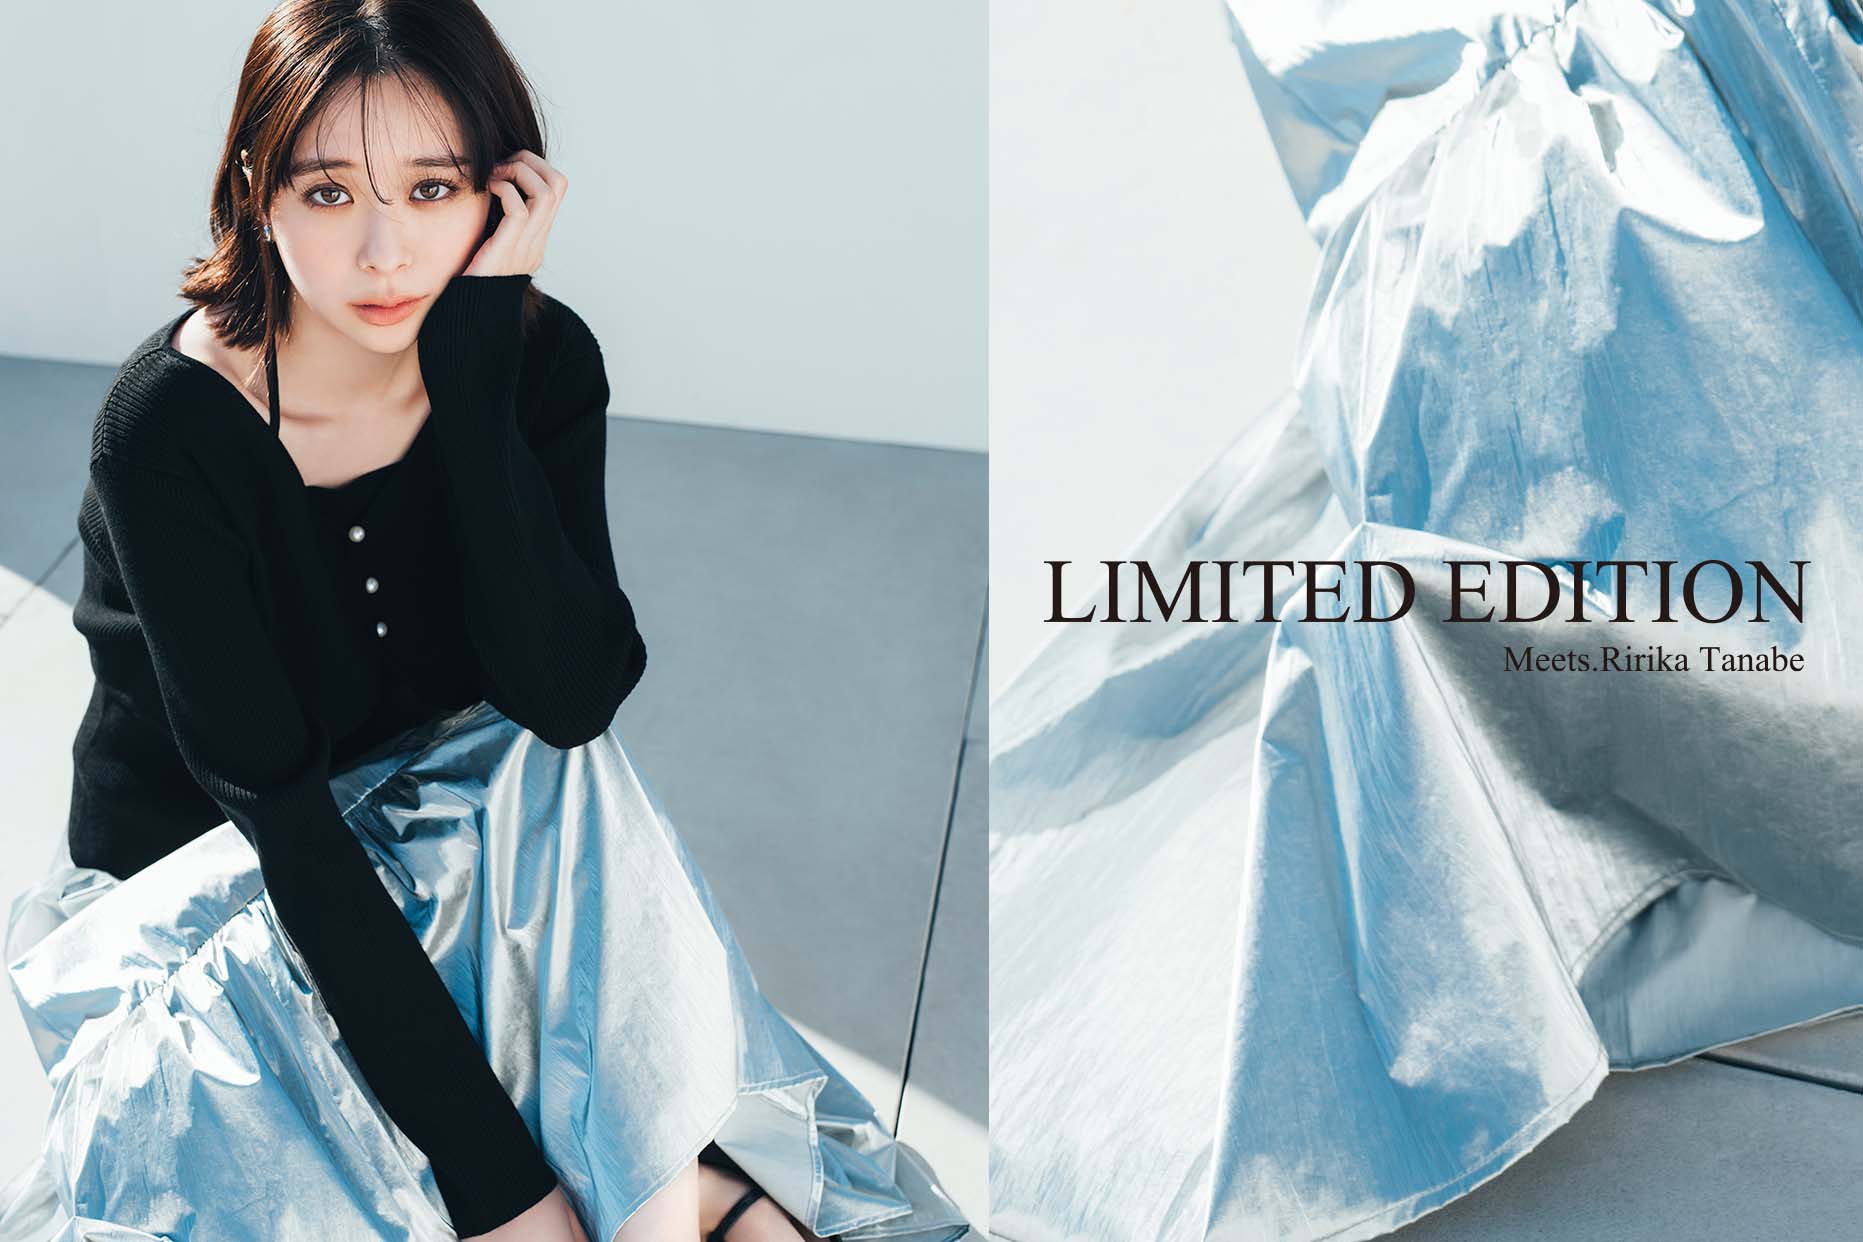 LIMITED EDITION Meets.Ririka Tanabe